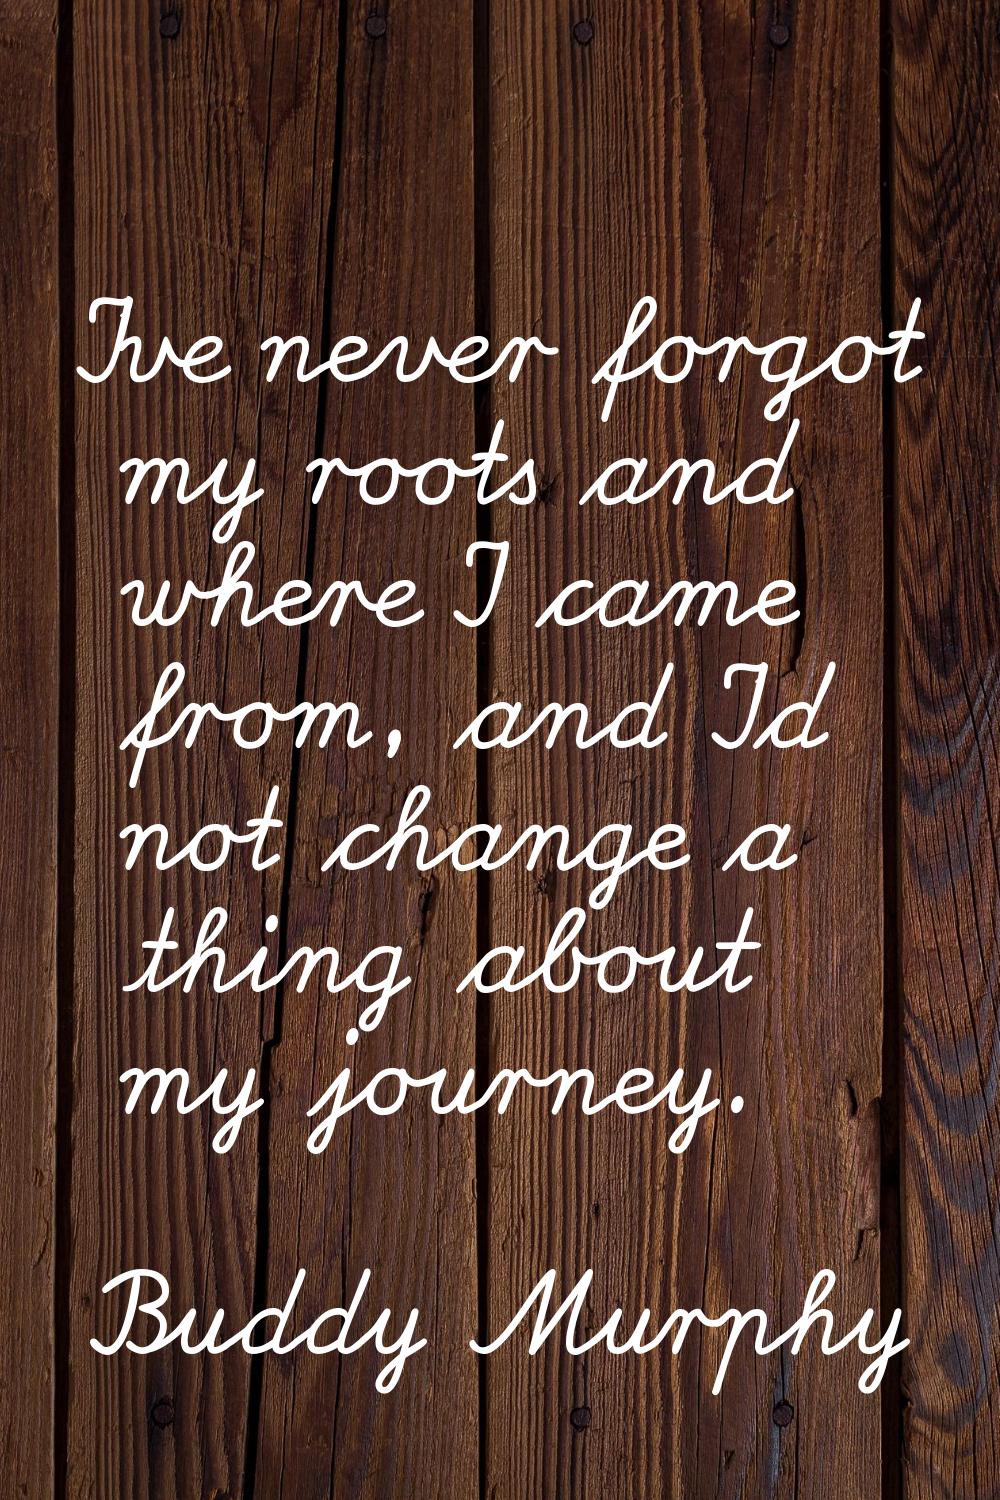 I've never forgot my roots and where I came from, and I'd not change a thing about my journey.